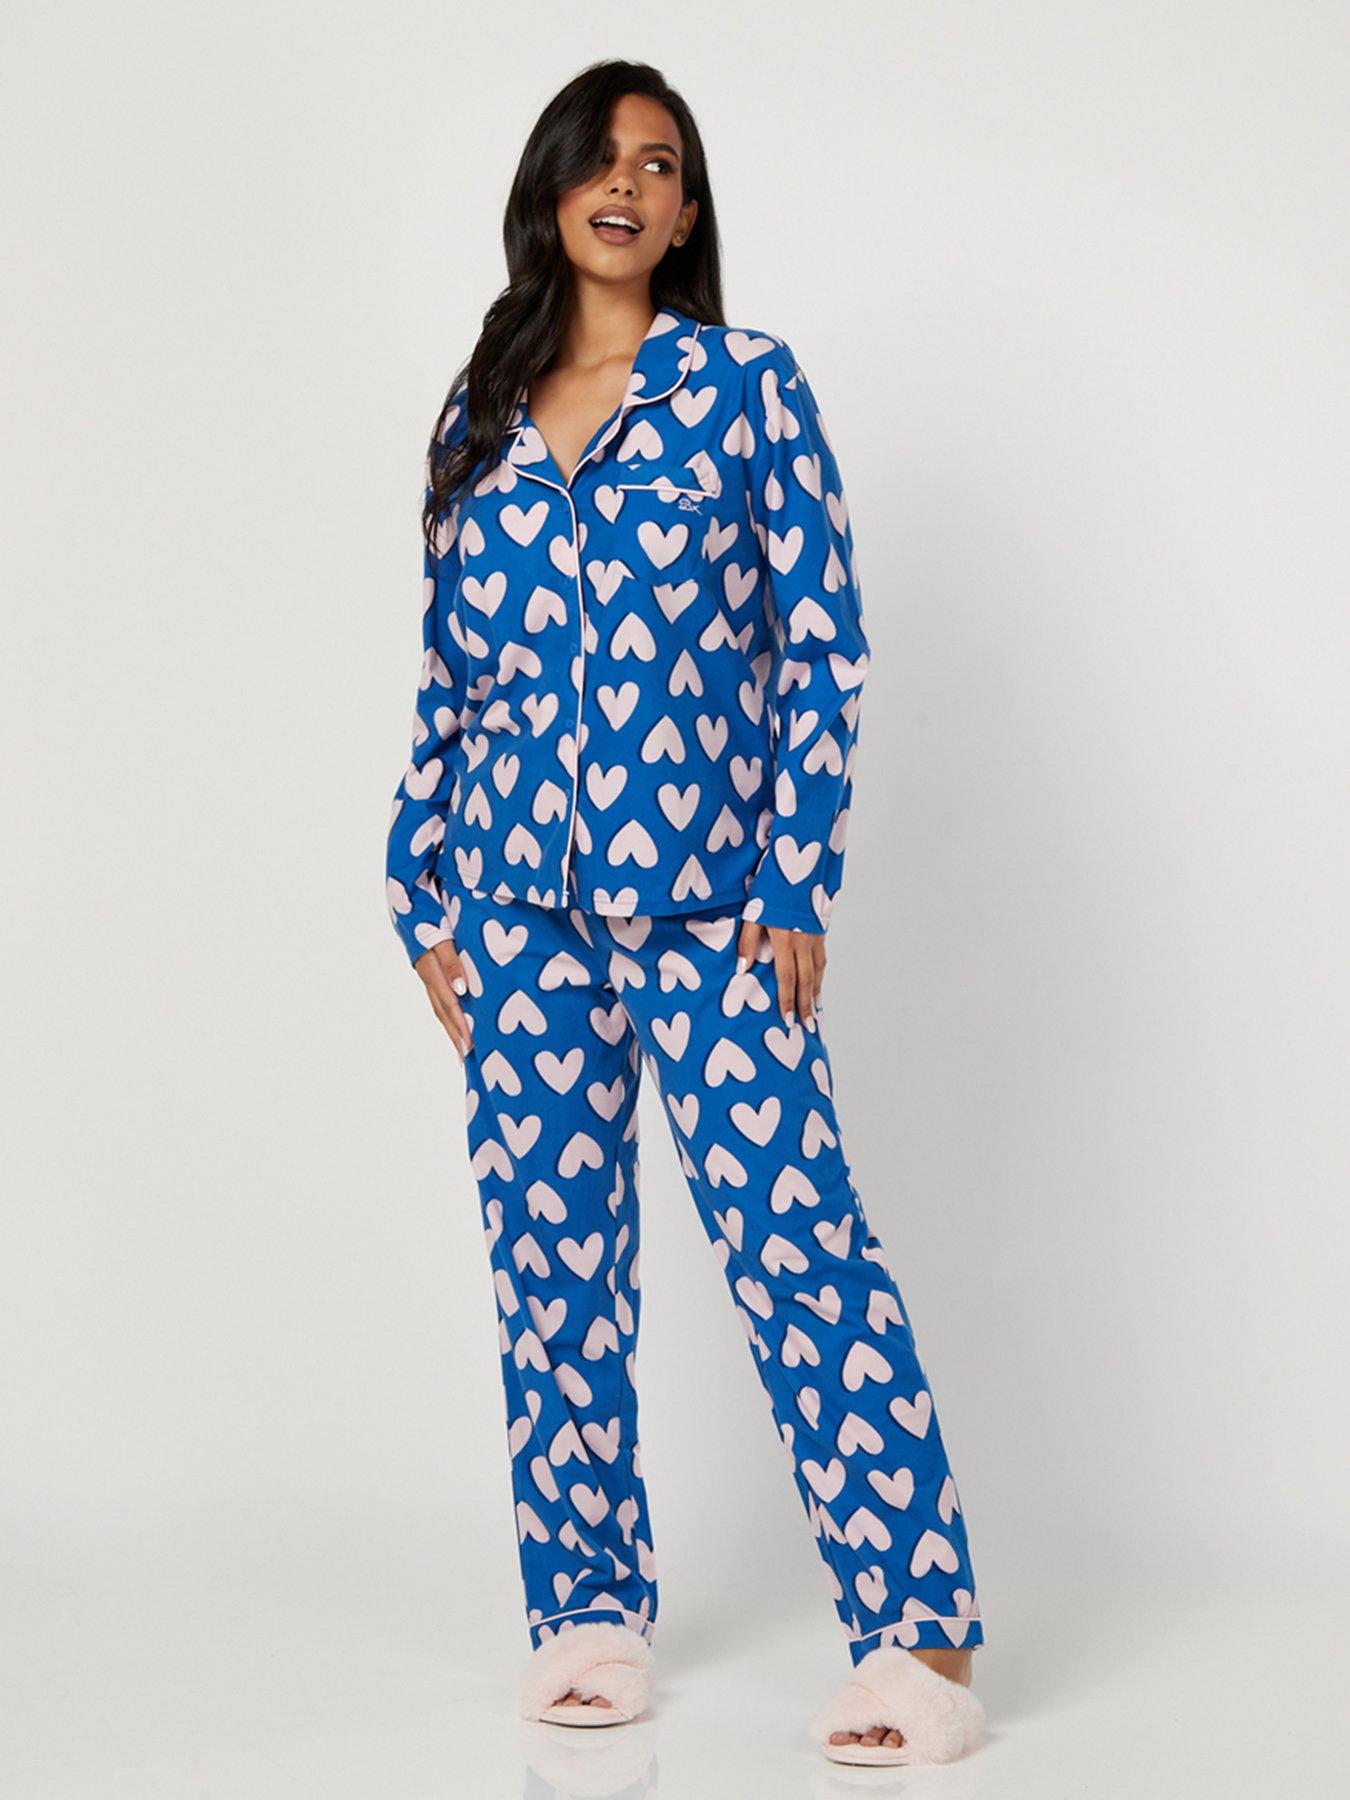 Lots Of Options Ladies Pyjama Sets Sizes 8-22 Plus Size PJ Tops & Bottoms Ideal For All Seasons 